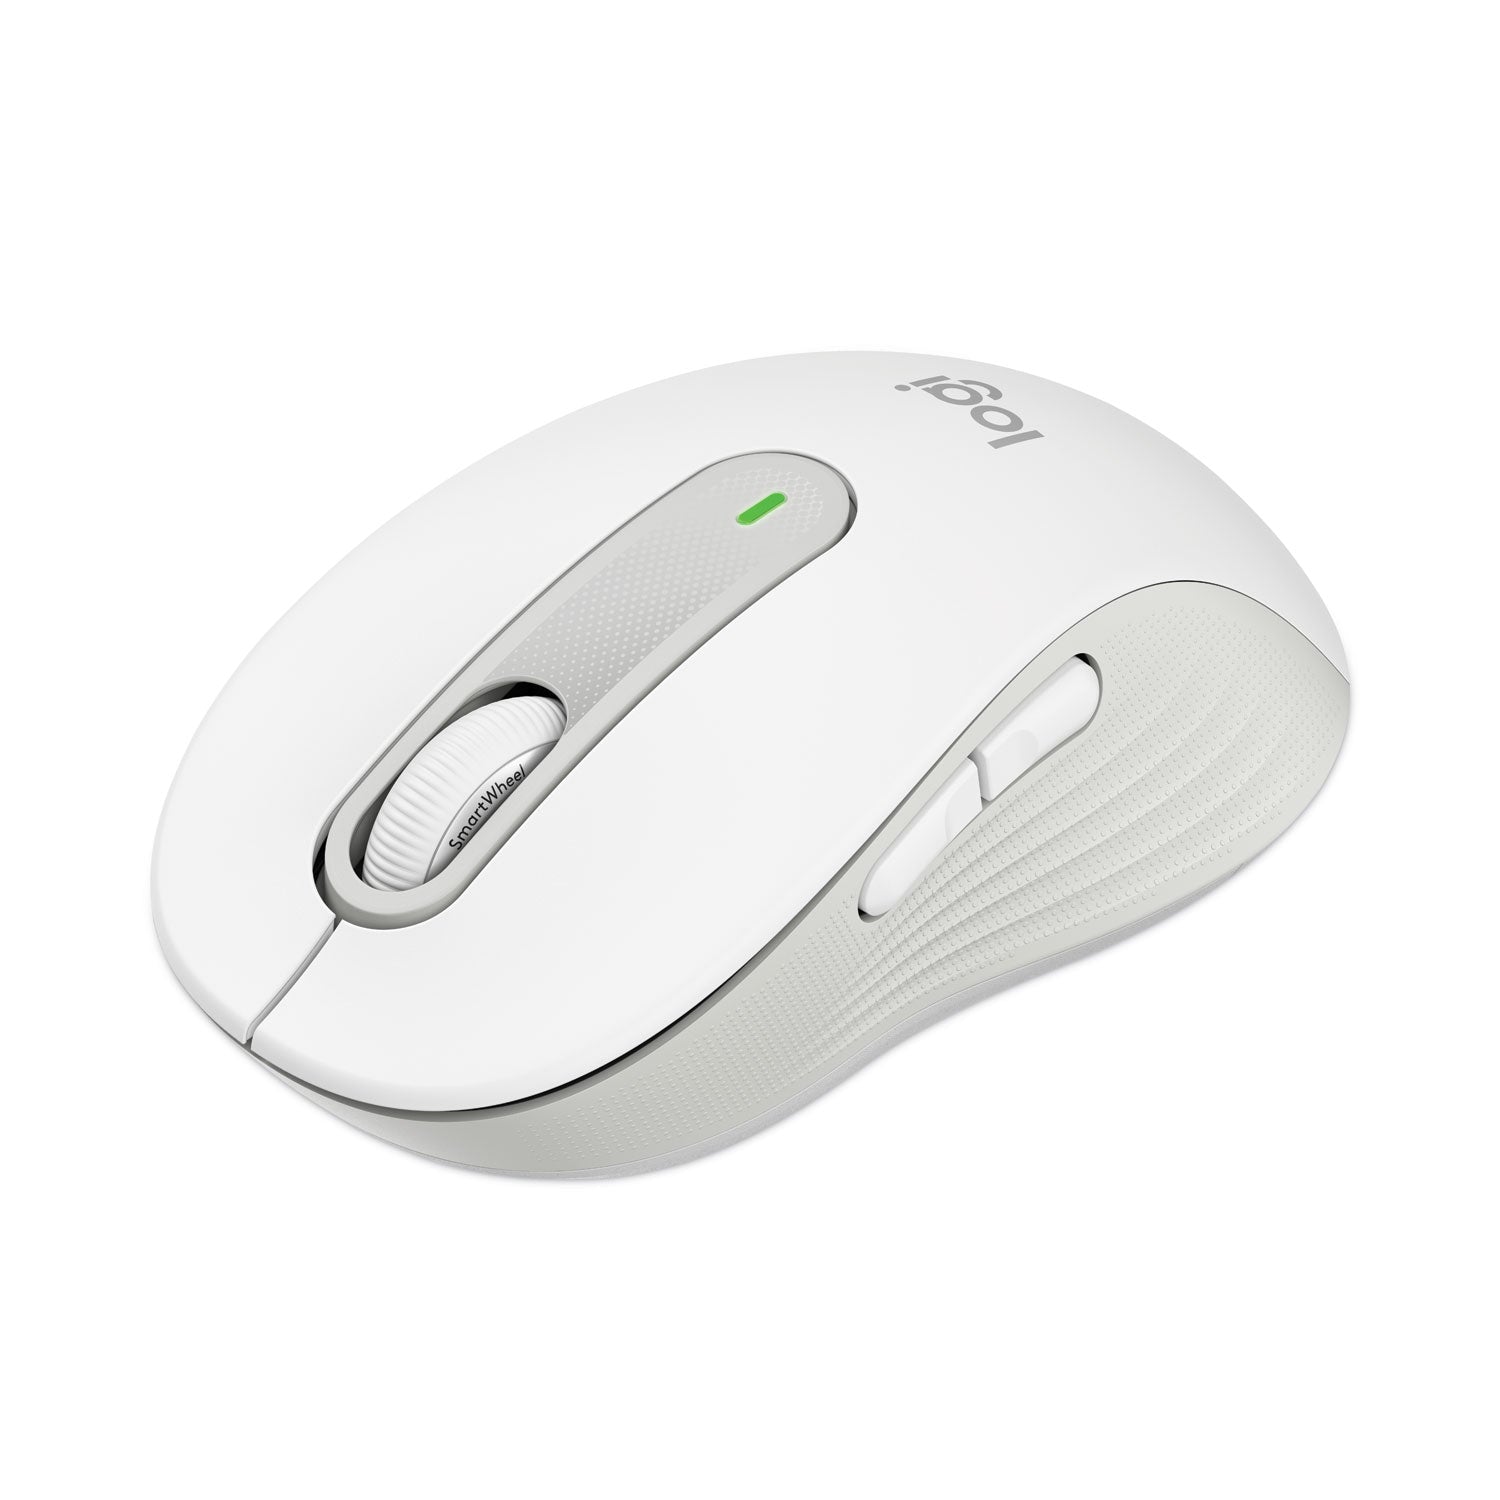 signature-m650-for-business-wireless-mouse-medium-24-ghz-frequency-33-ft-wireless-range-right-hand-use-off-white_log910006273 - 2